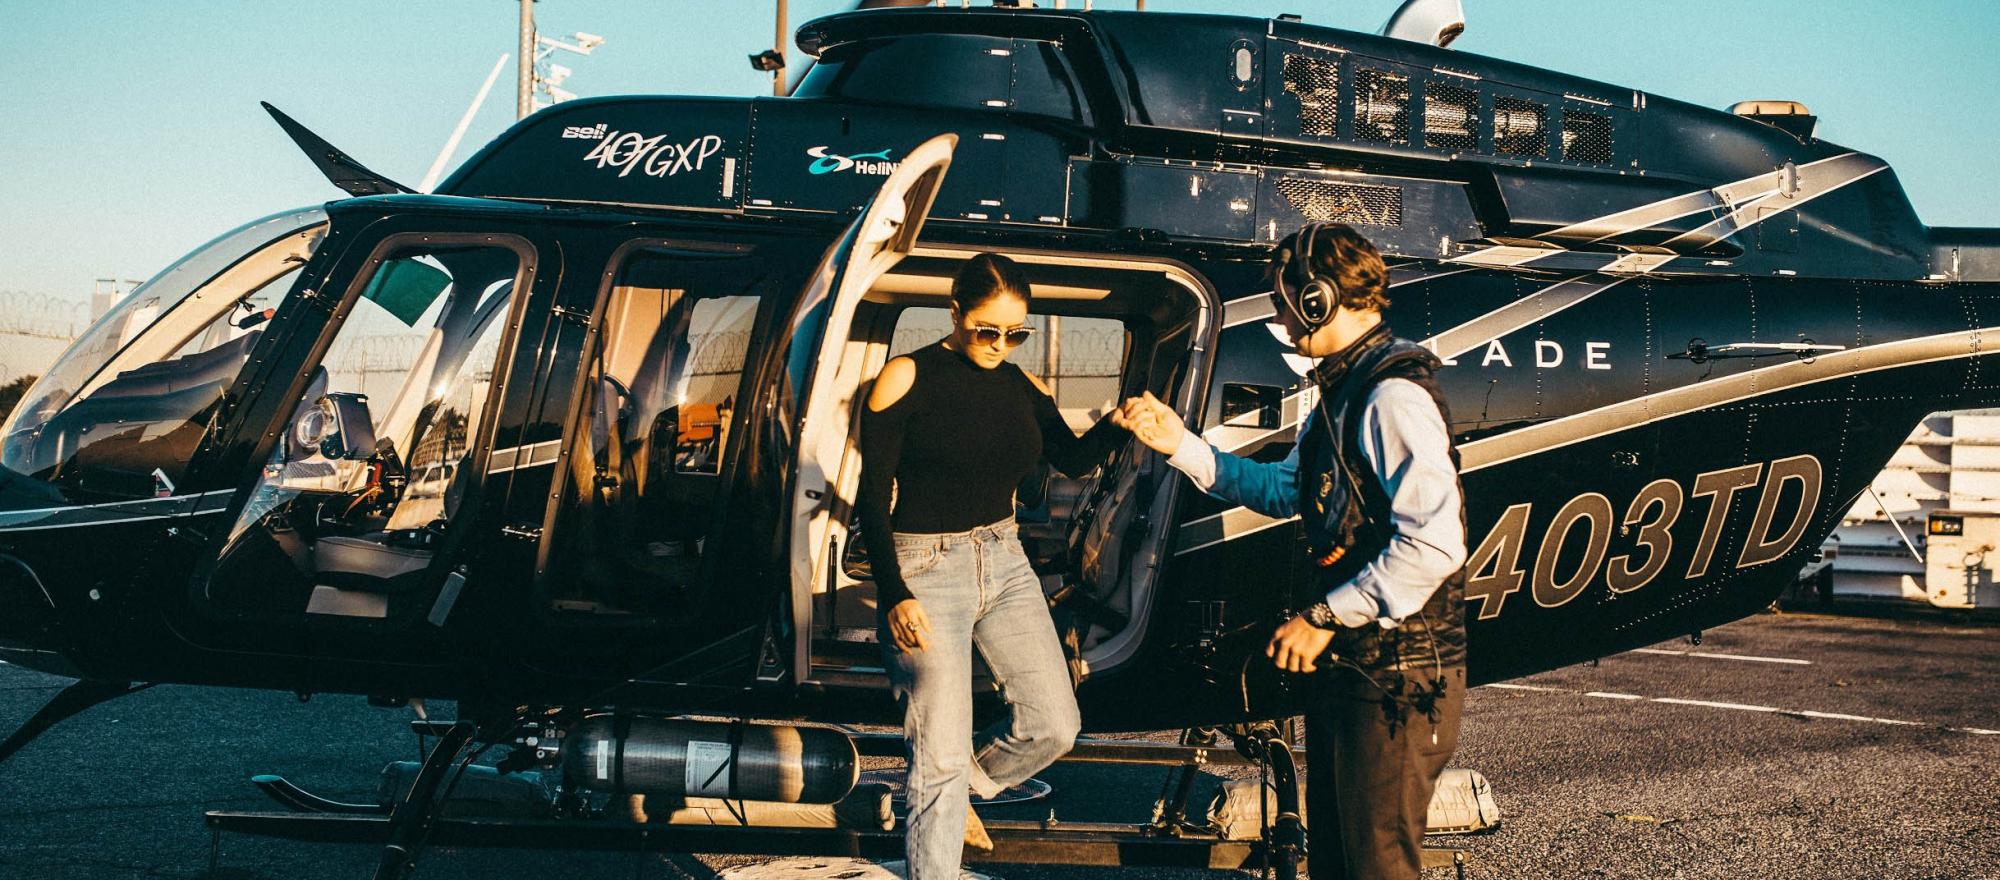 Female passenger exiting Blade helicopter with assistance from the pilot